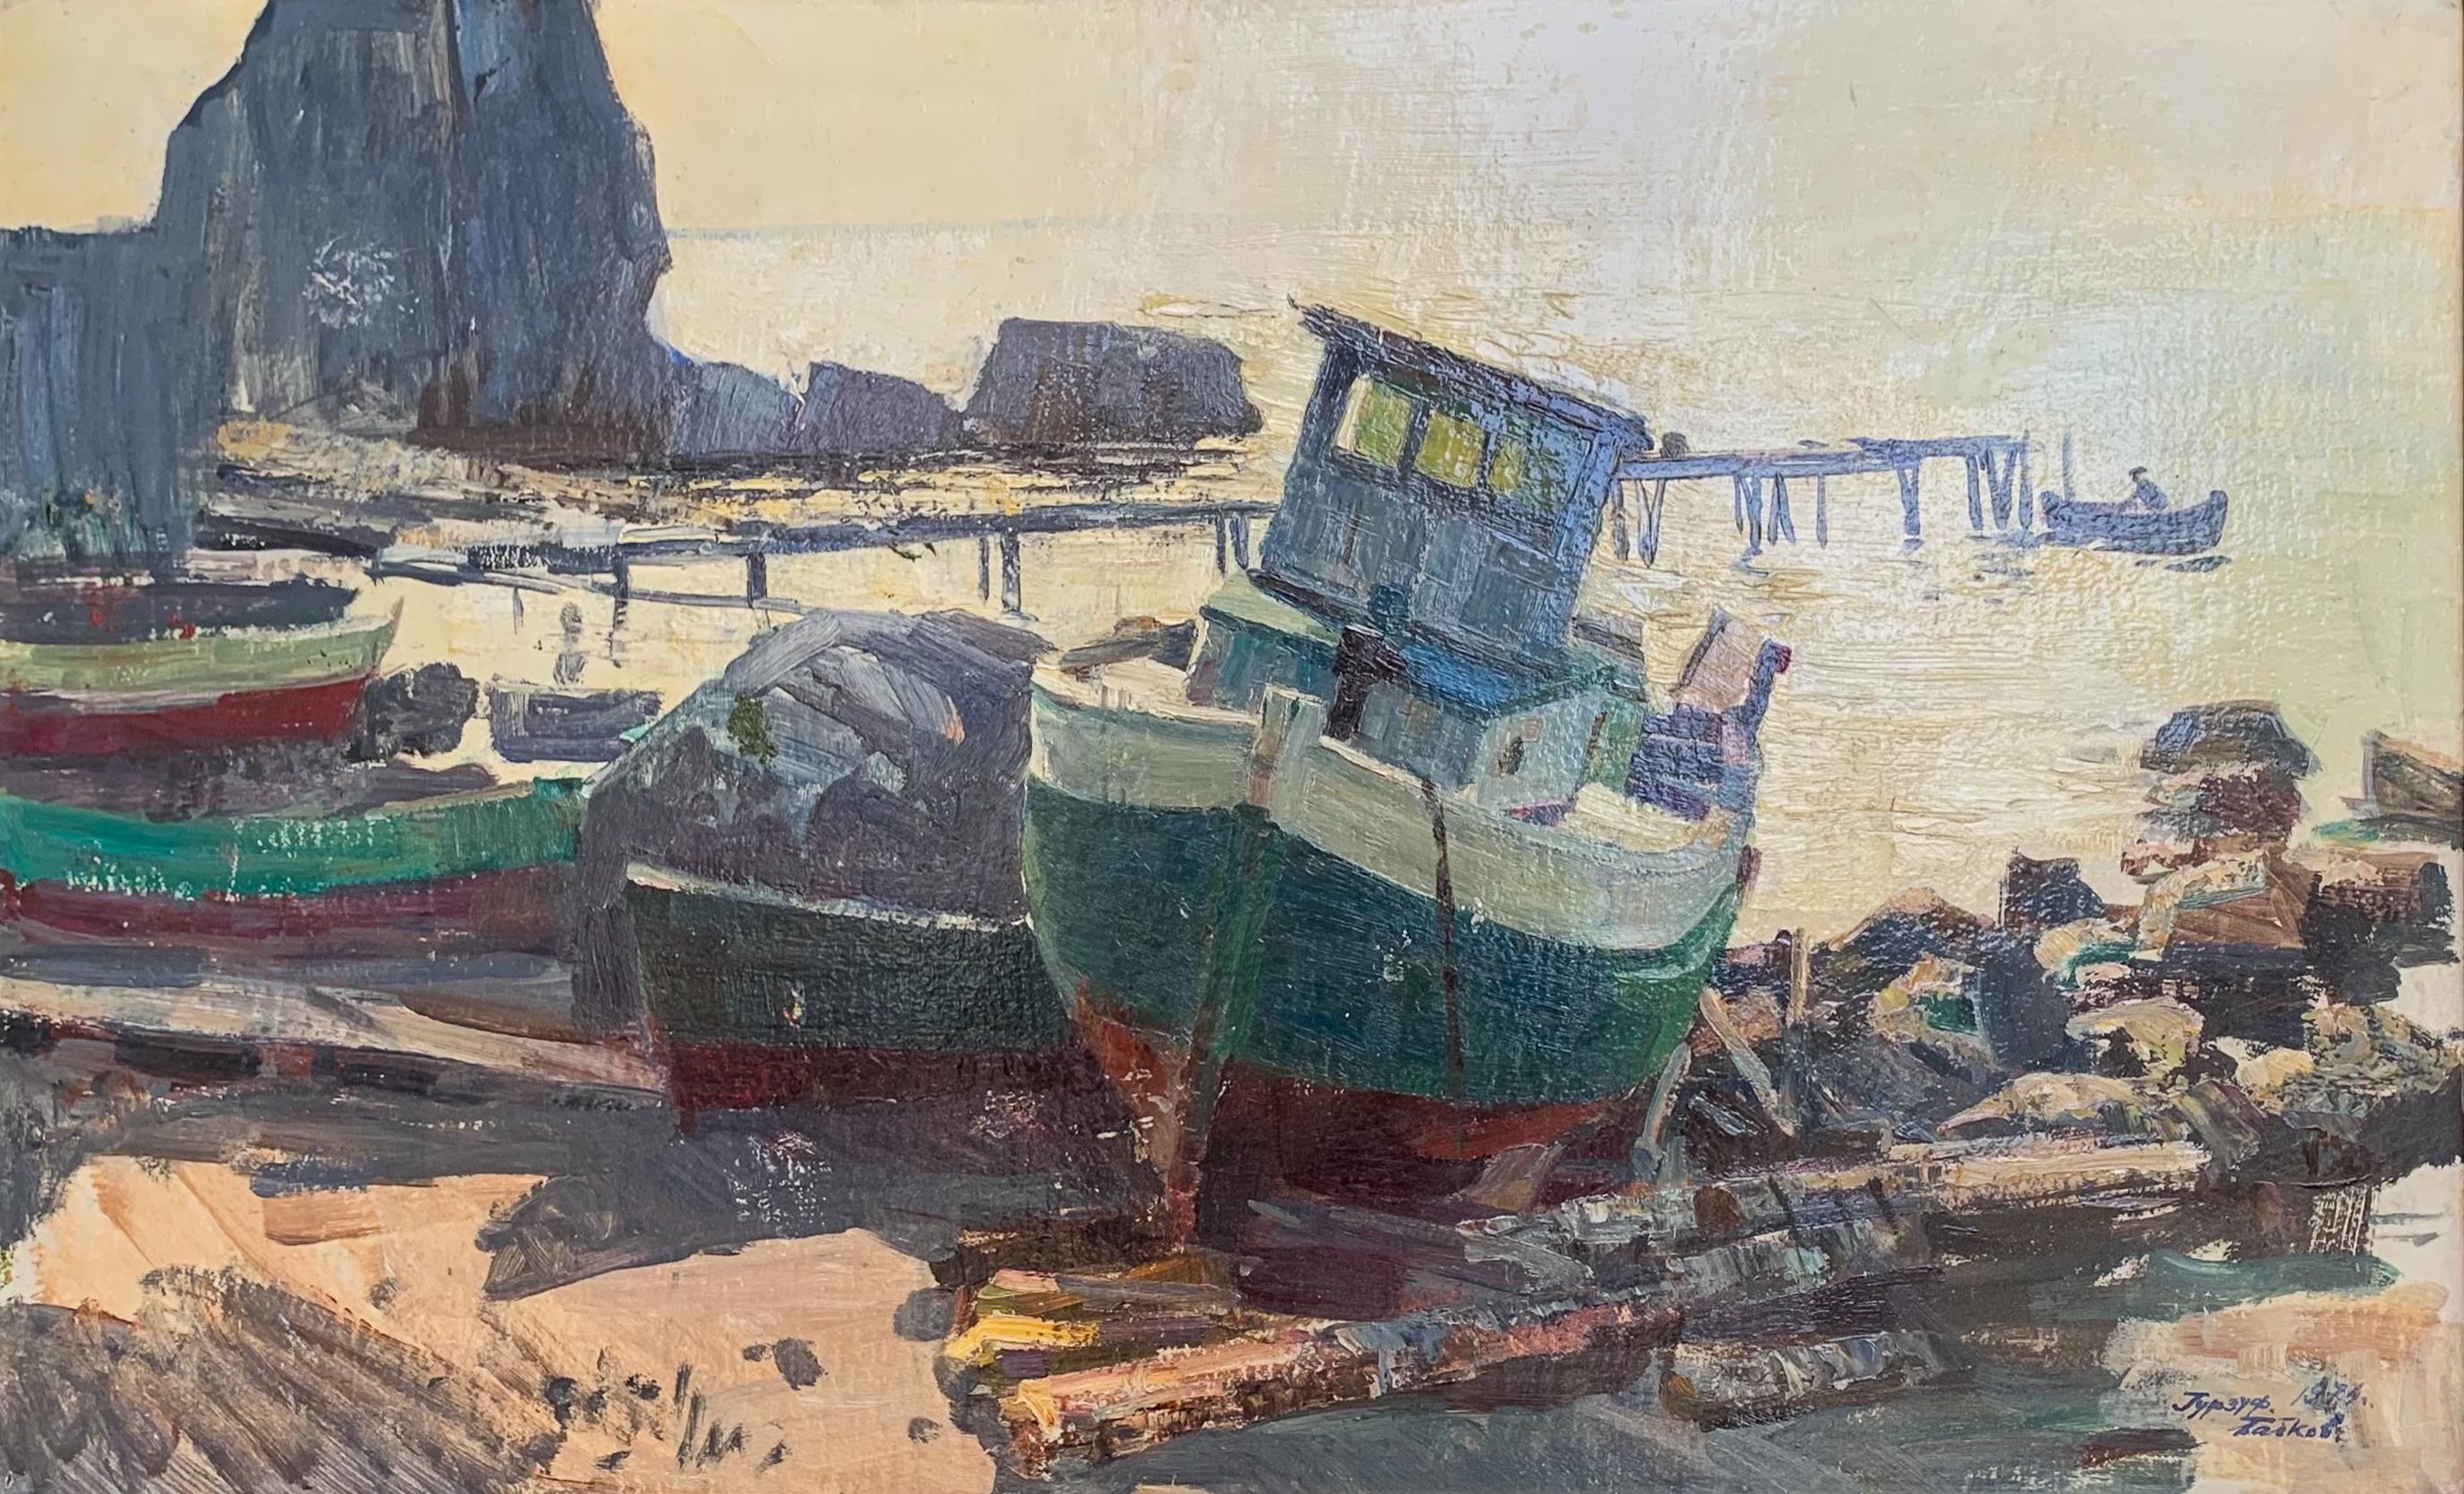 A serene beach scene bathed in bright sunlight.  The painting features fishing boats with green and red hulls resting among rocks on a beach with the sea in the background.  A distant pier stretches into the distance.

The paining is attractively